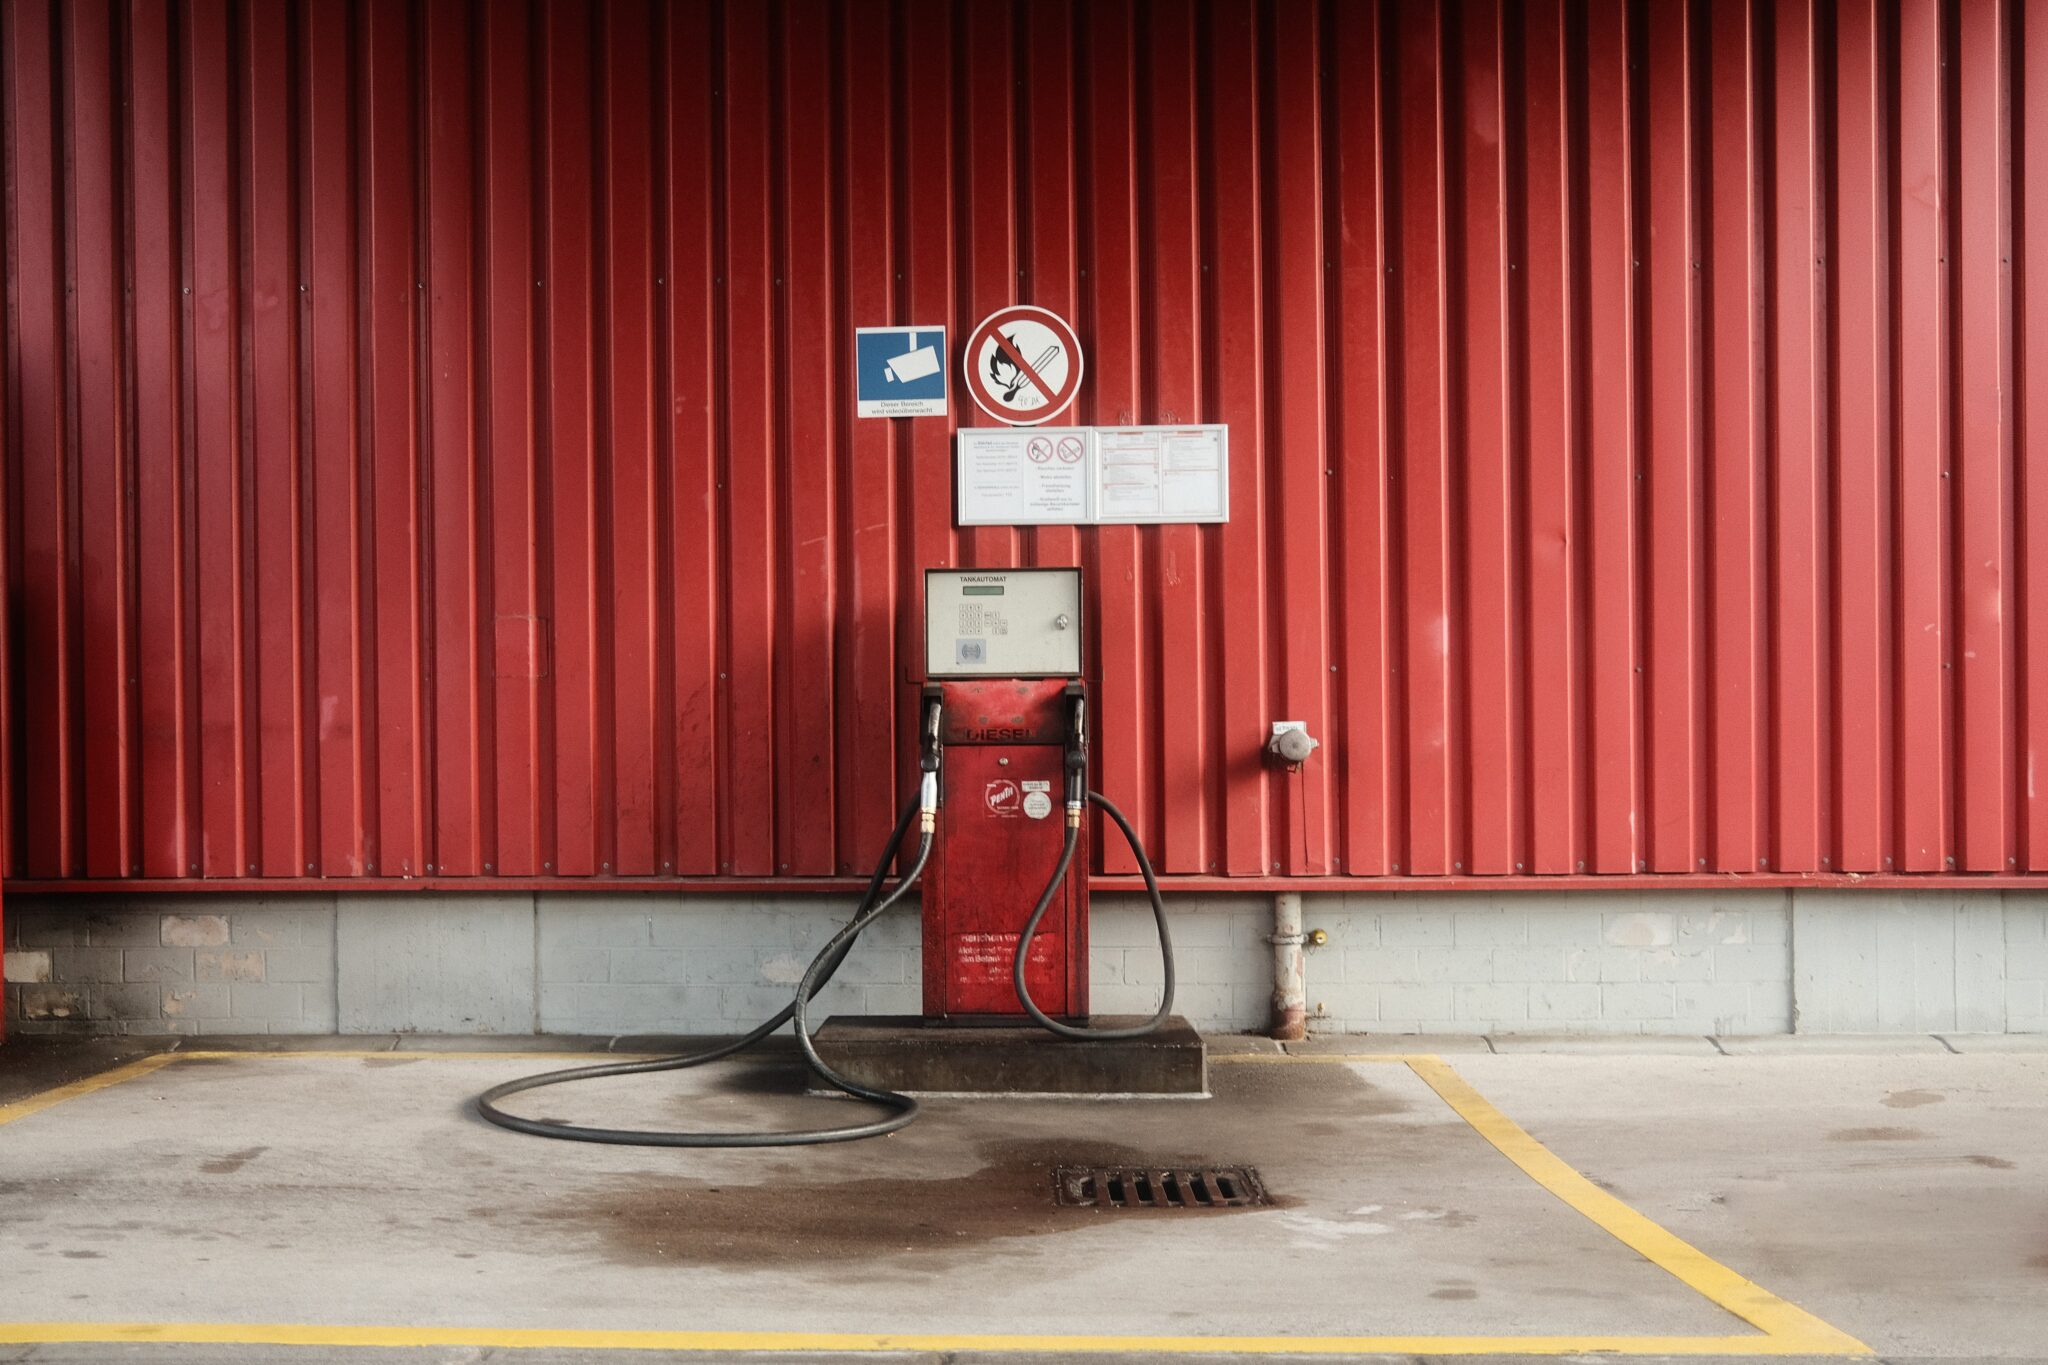 Old fabric fuel station in front of a red wall.